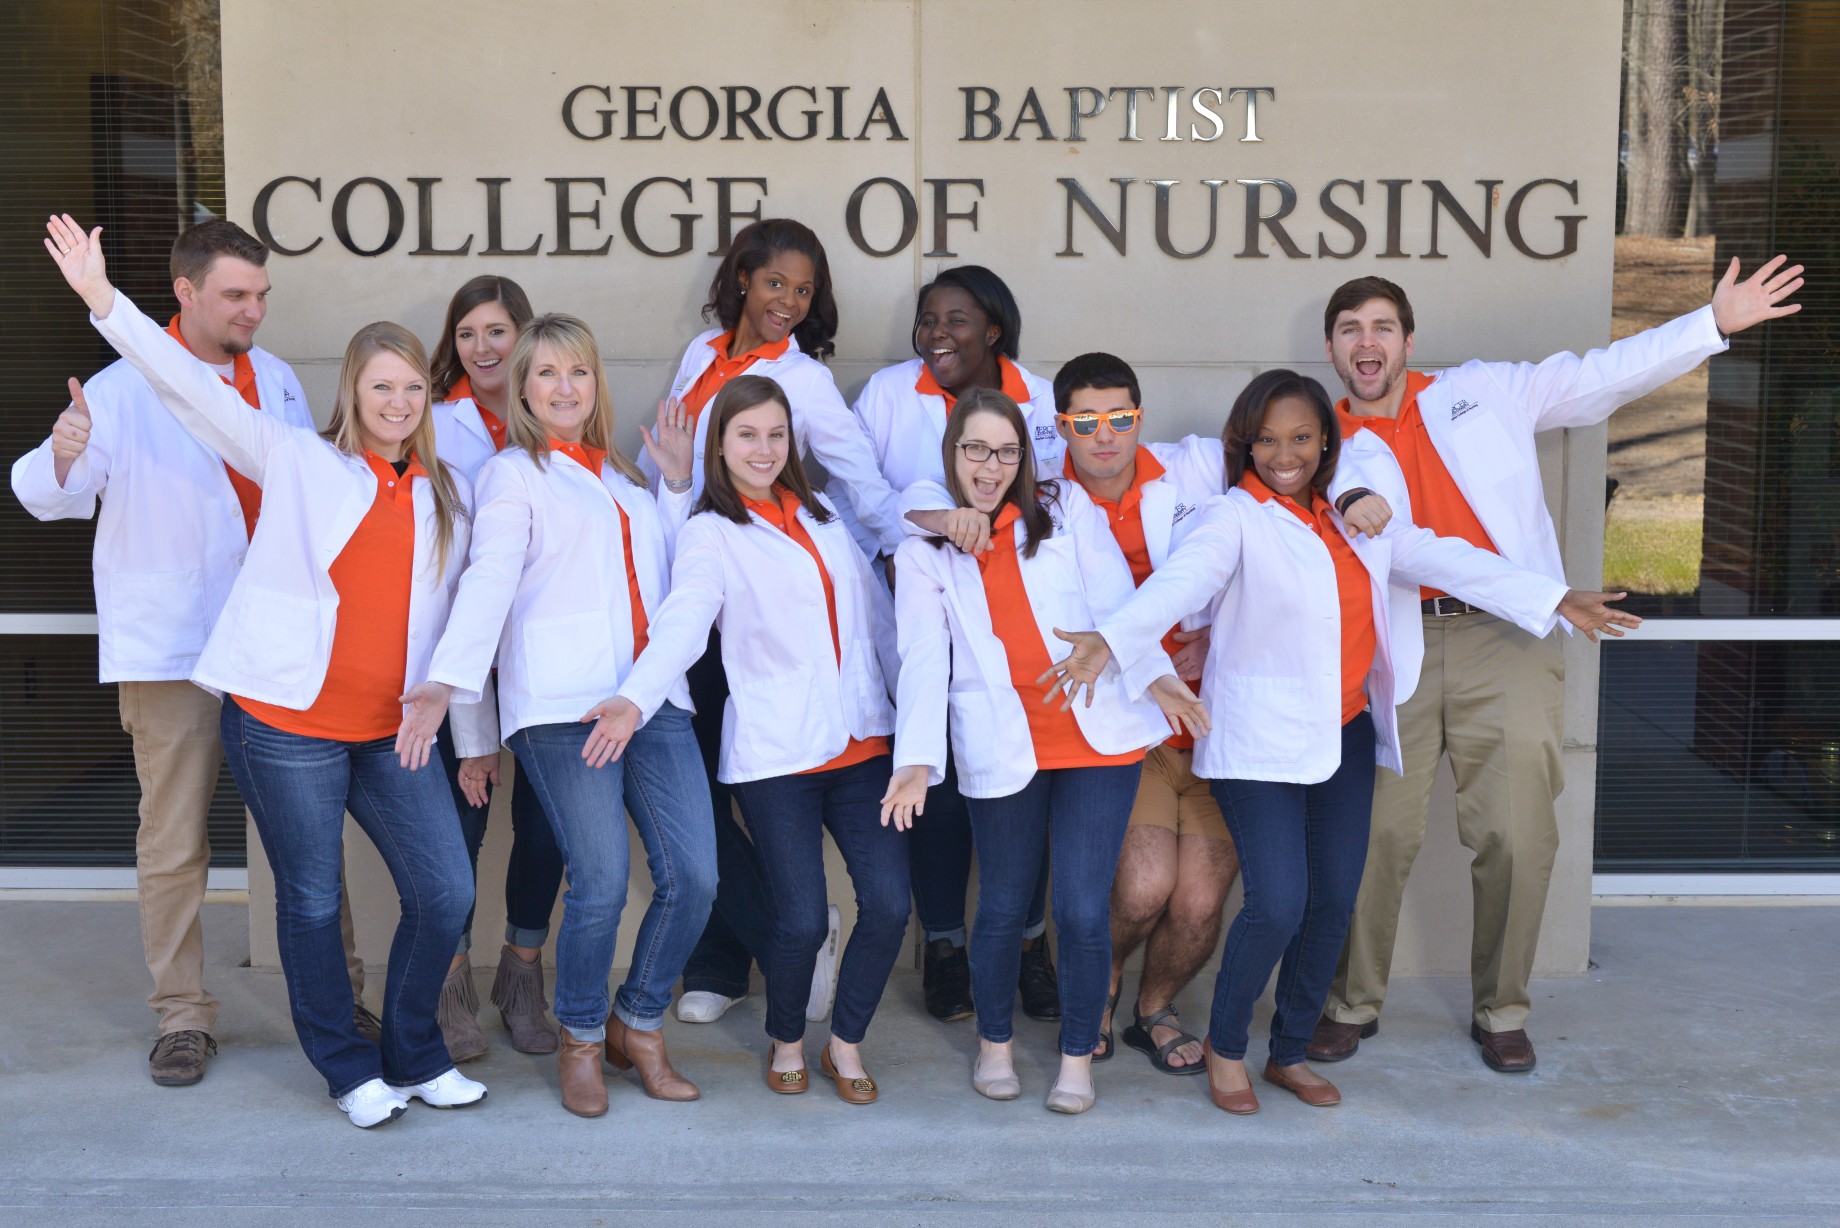 present day photo of students in white coats in front of school of nursing sign